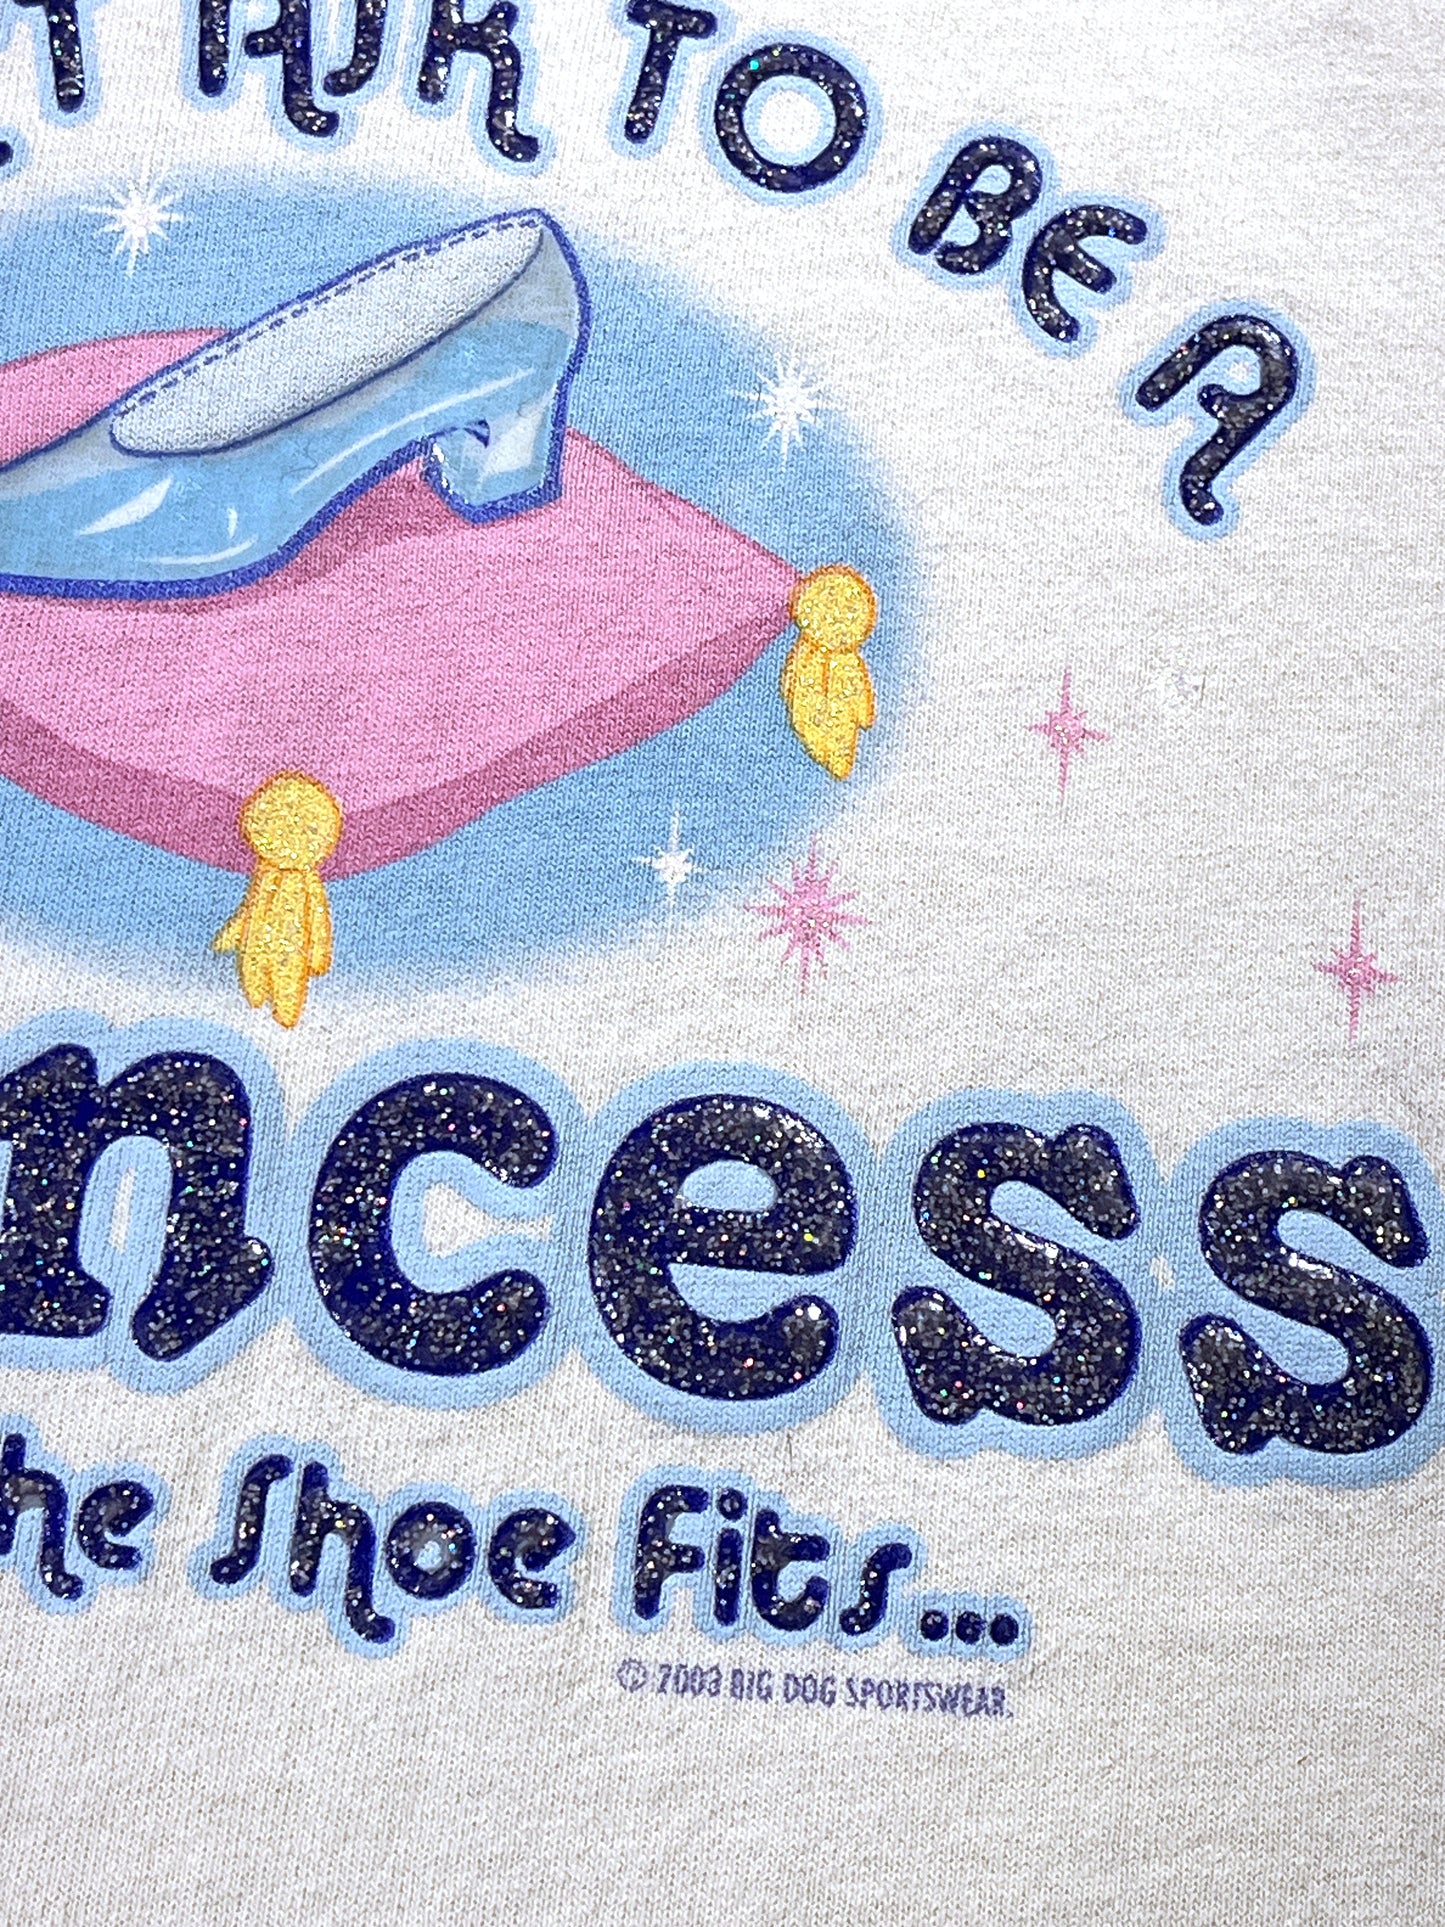 Vintage Princess T-Shirt Funny Slogan Big Dogs But If The Shoe Fits 2003